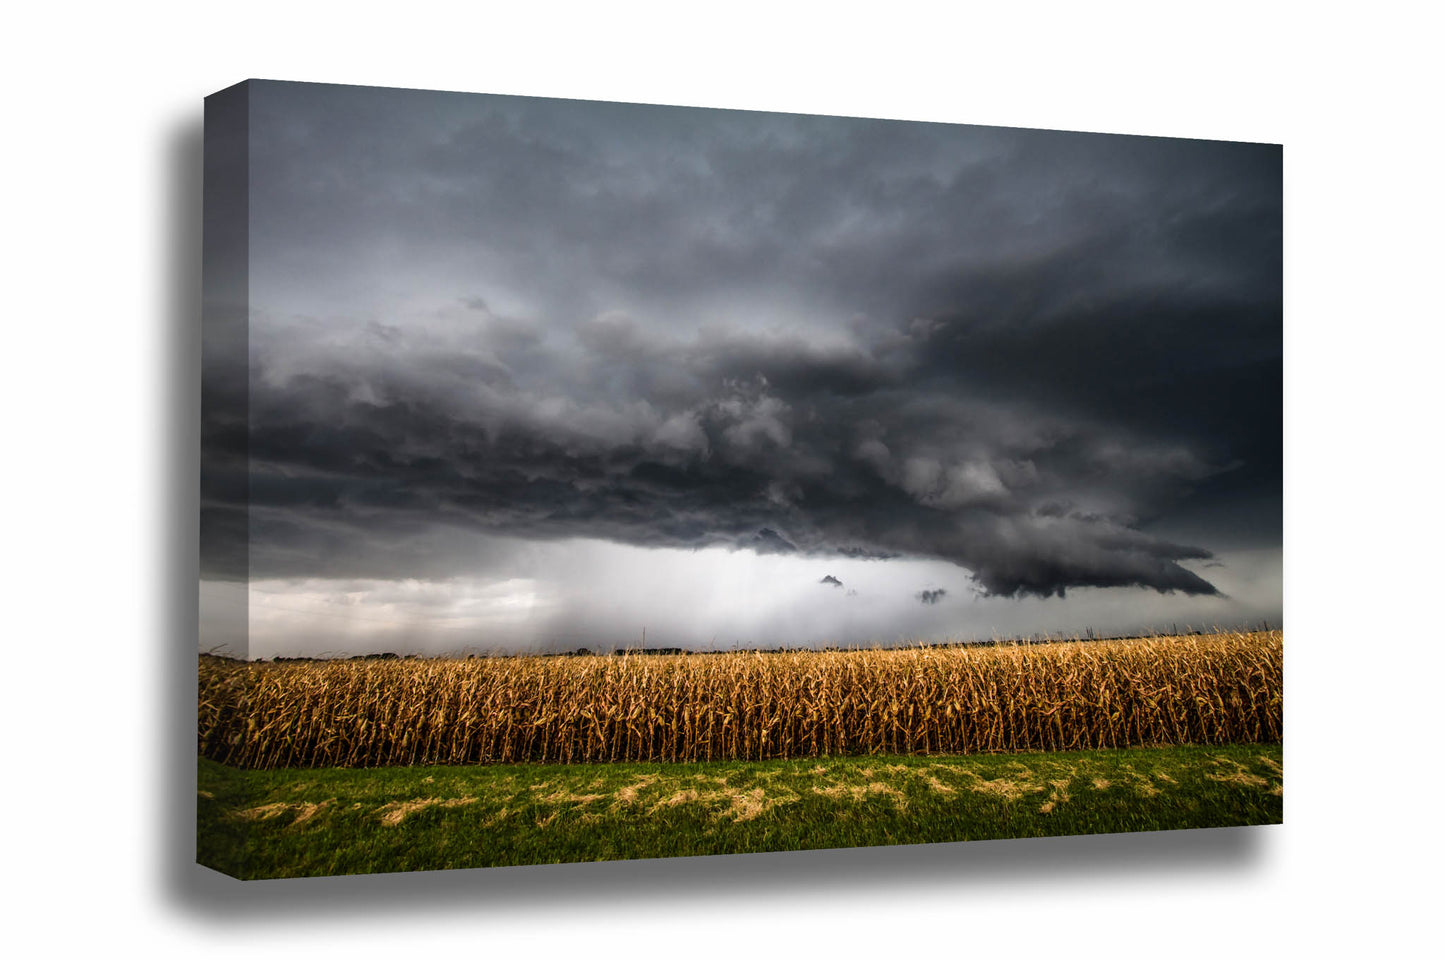 Storm canvas wall art of an intense thunderstorm advancing over a withered corn crop on an autumn day in Kansas by Sean Ramsey of Southern Plains Photography.